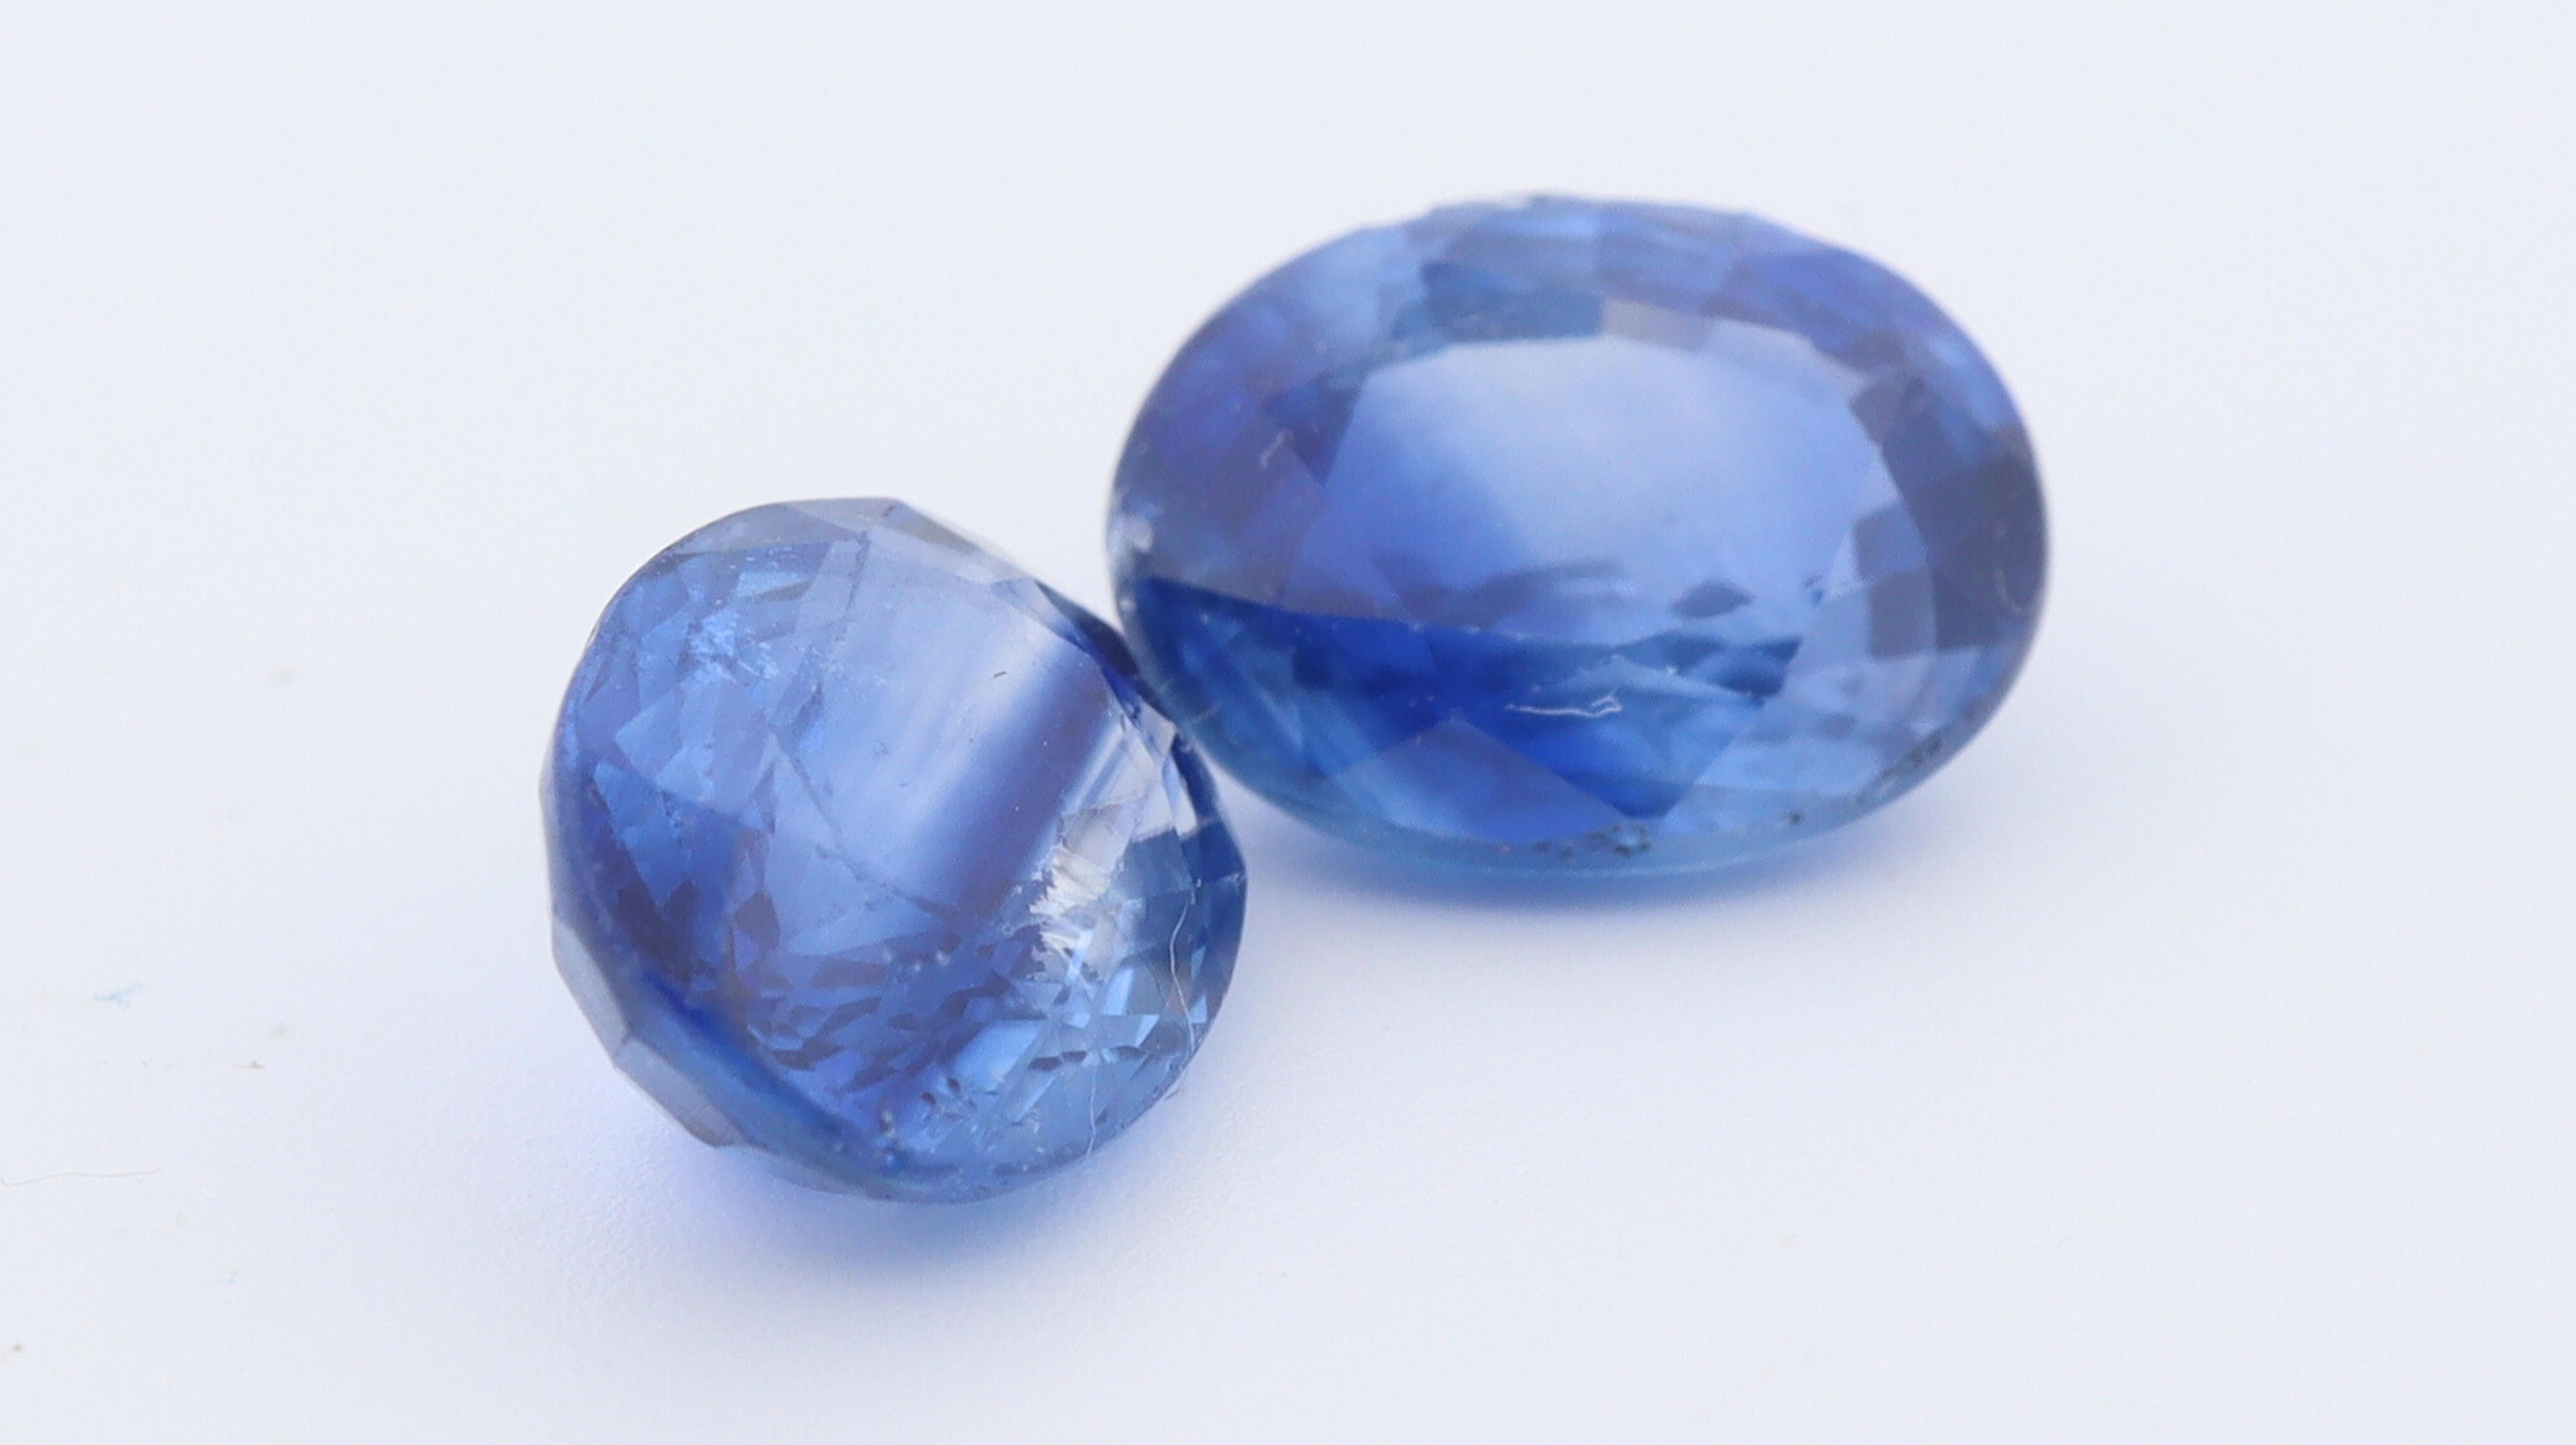 Certified Pair of Oval Blue Sapphires from Sri Lanka - 2.82ct For Sale 4